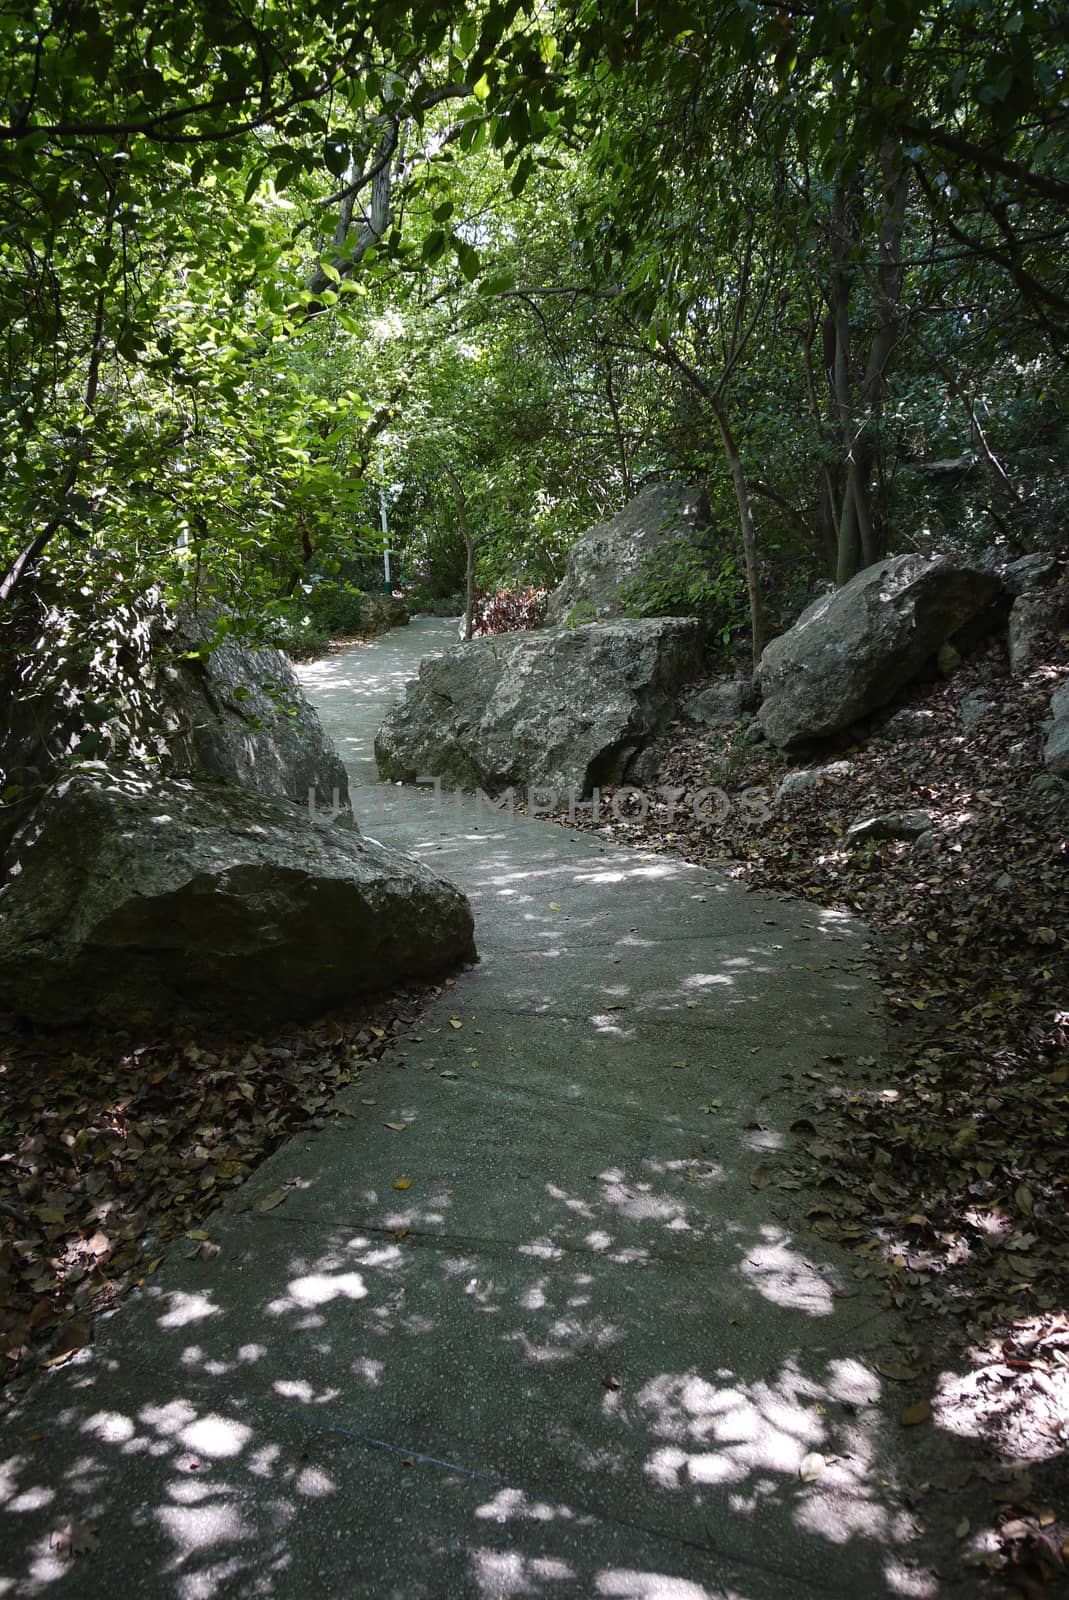 A path laid out of large slabs in the forest often walking past huge boulders lying on the side